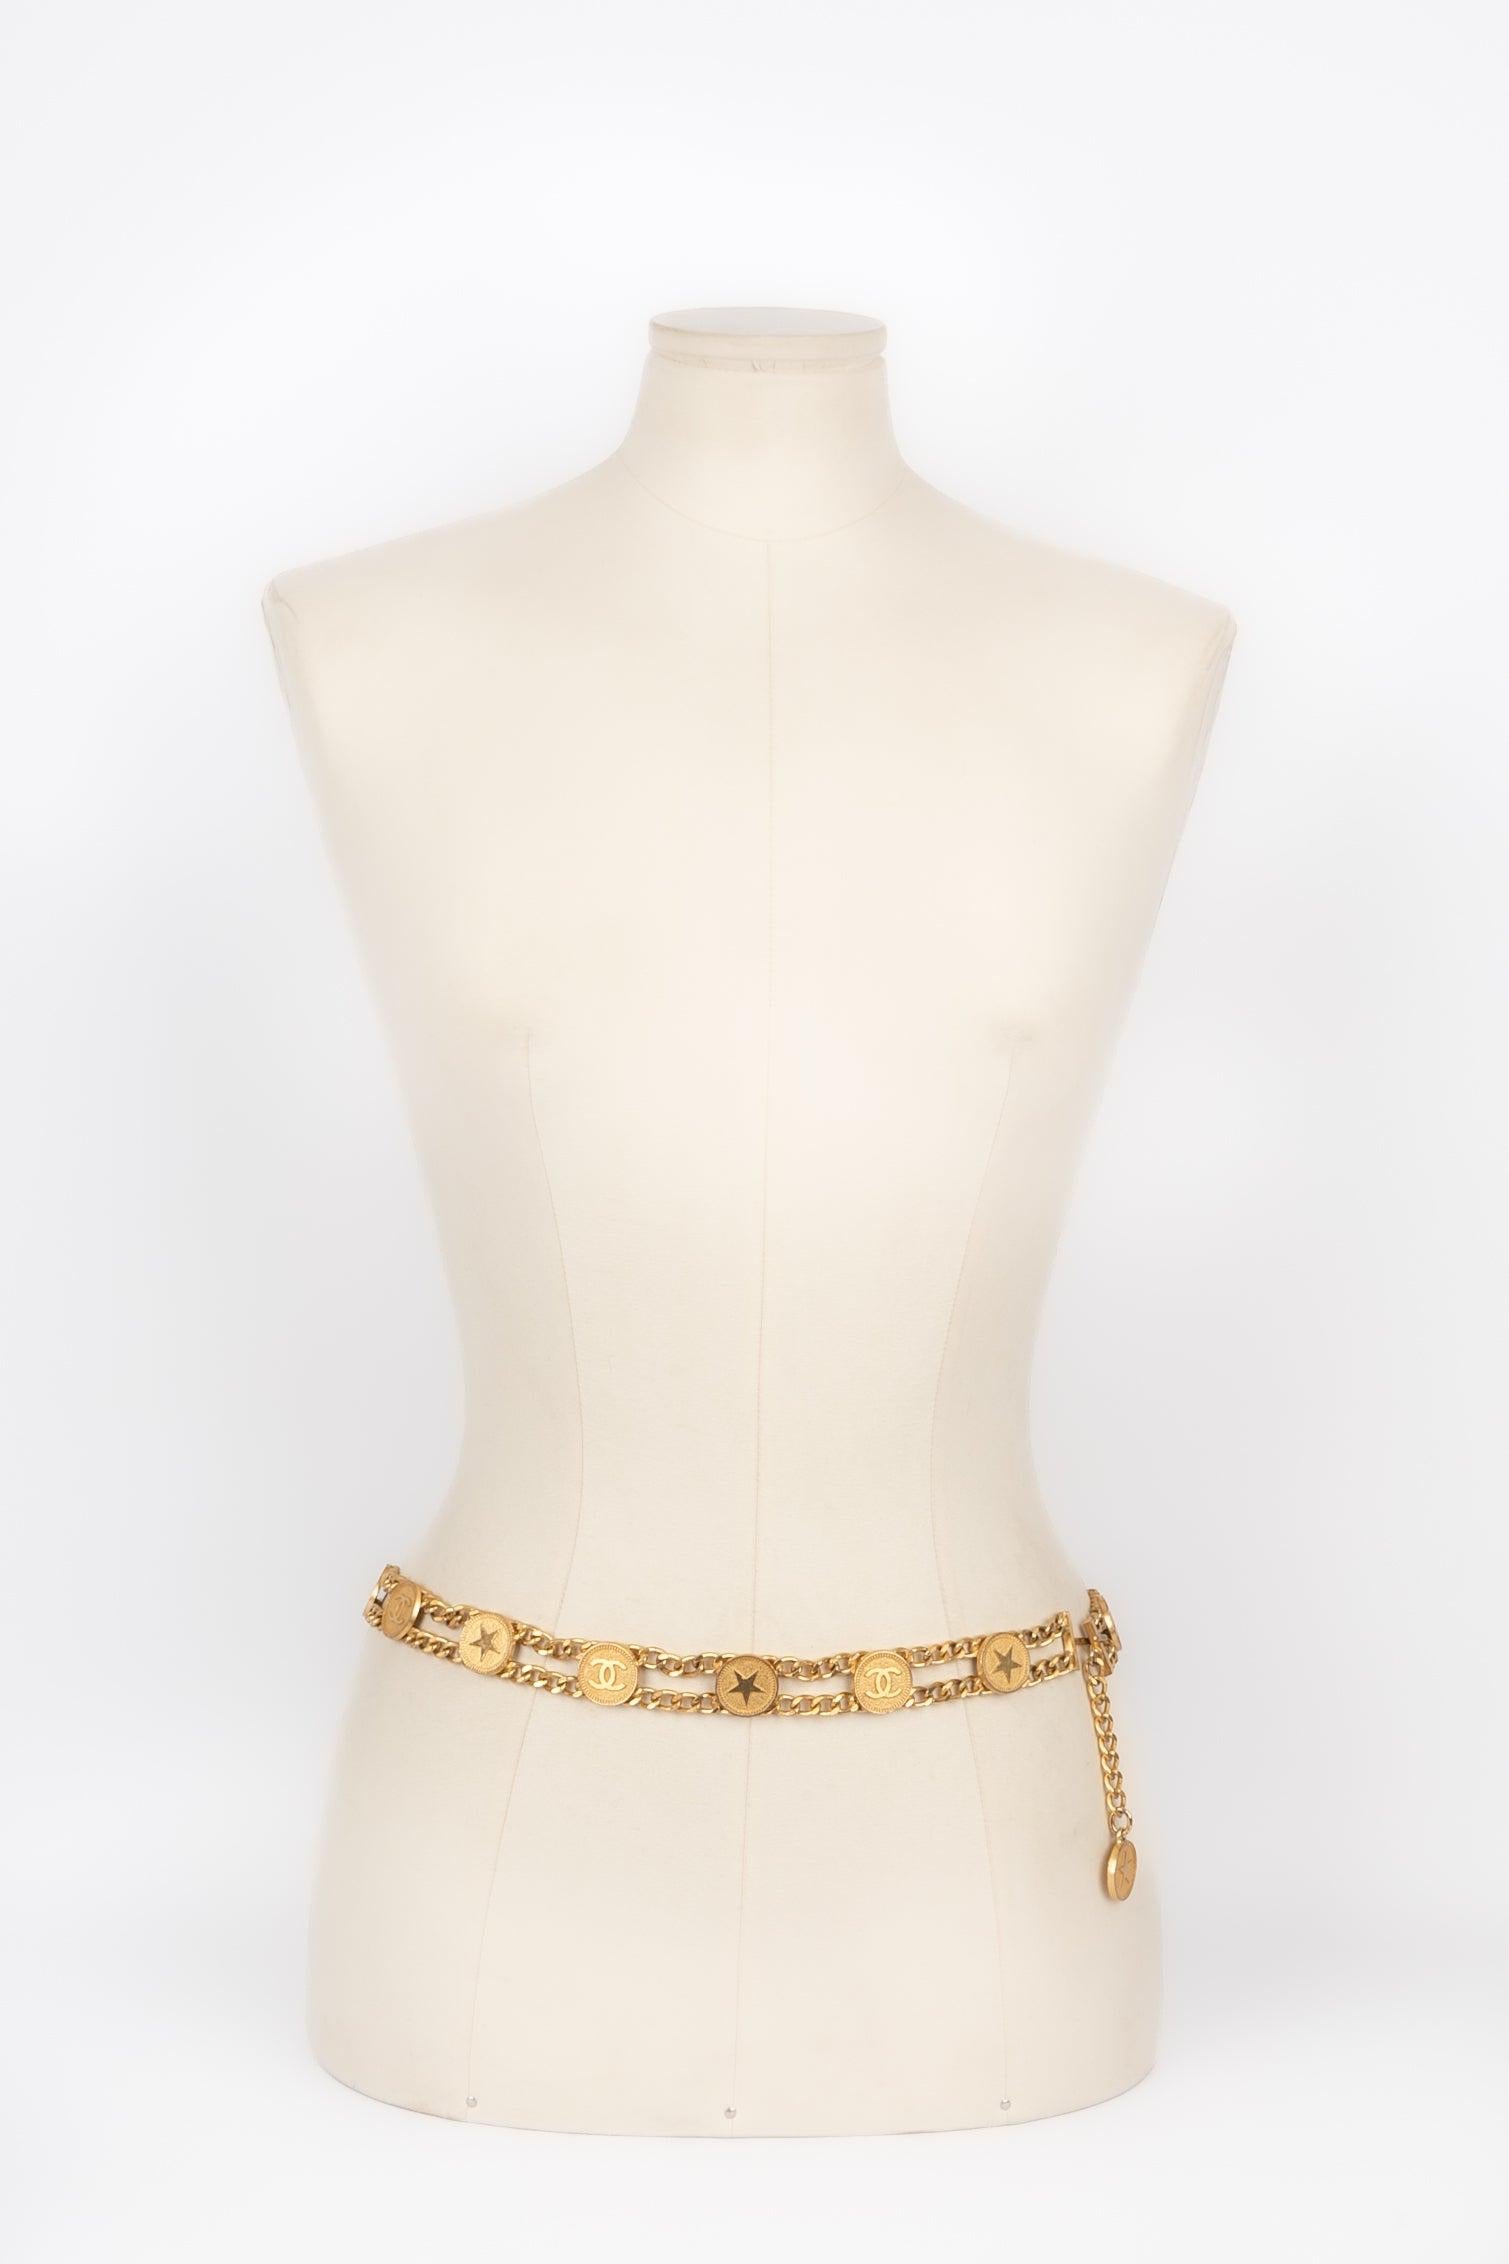 Chanel - (Made in France) Golden metal belt. 2001 Spring-Summer Collection.
 
 Additional information: 
 Condition: Very good condition
 Dimensions: Length: 85 cm
 Period: 21st Century
 
 Seller Reference: CCB100